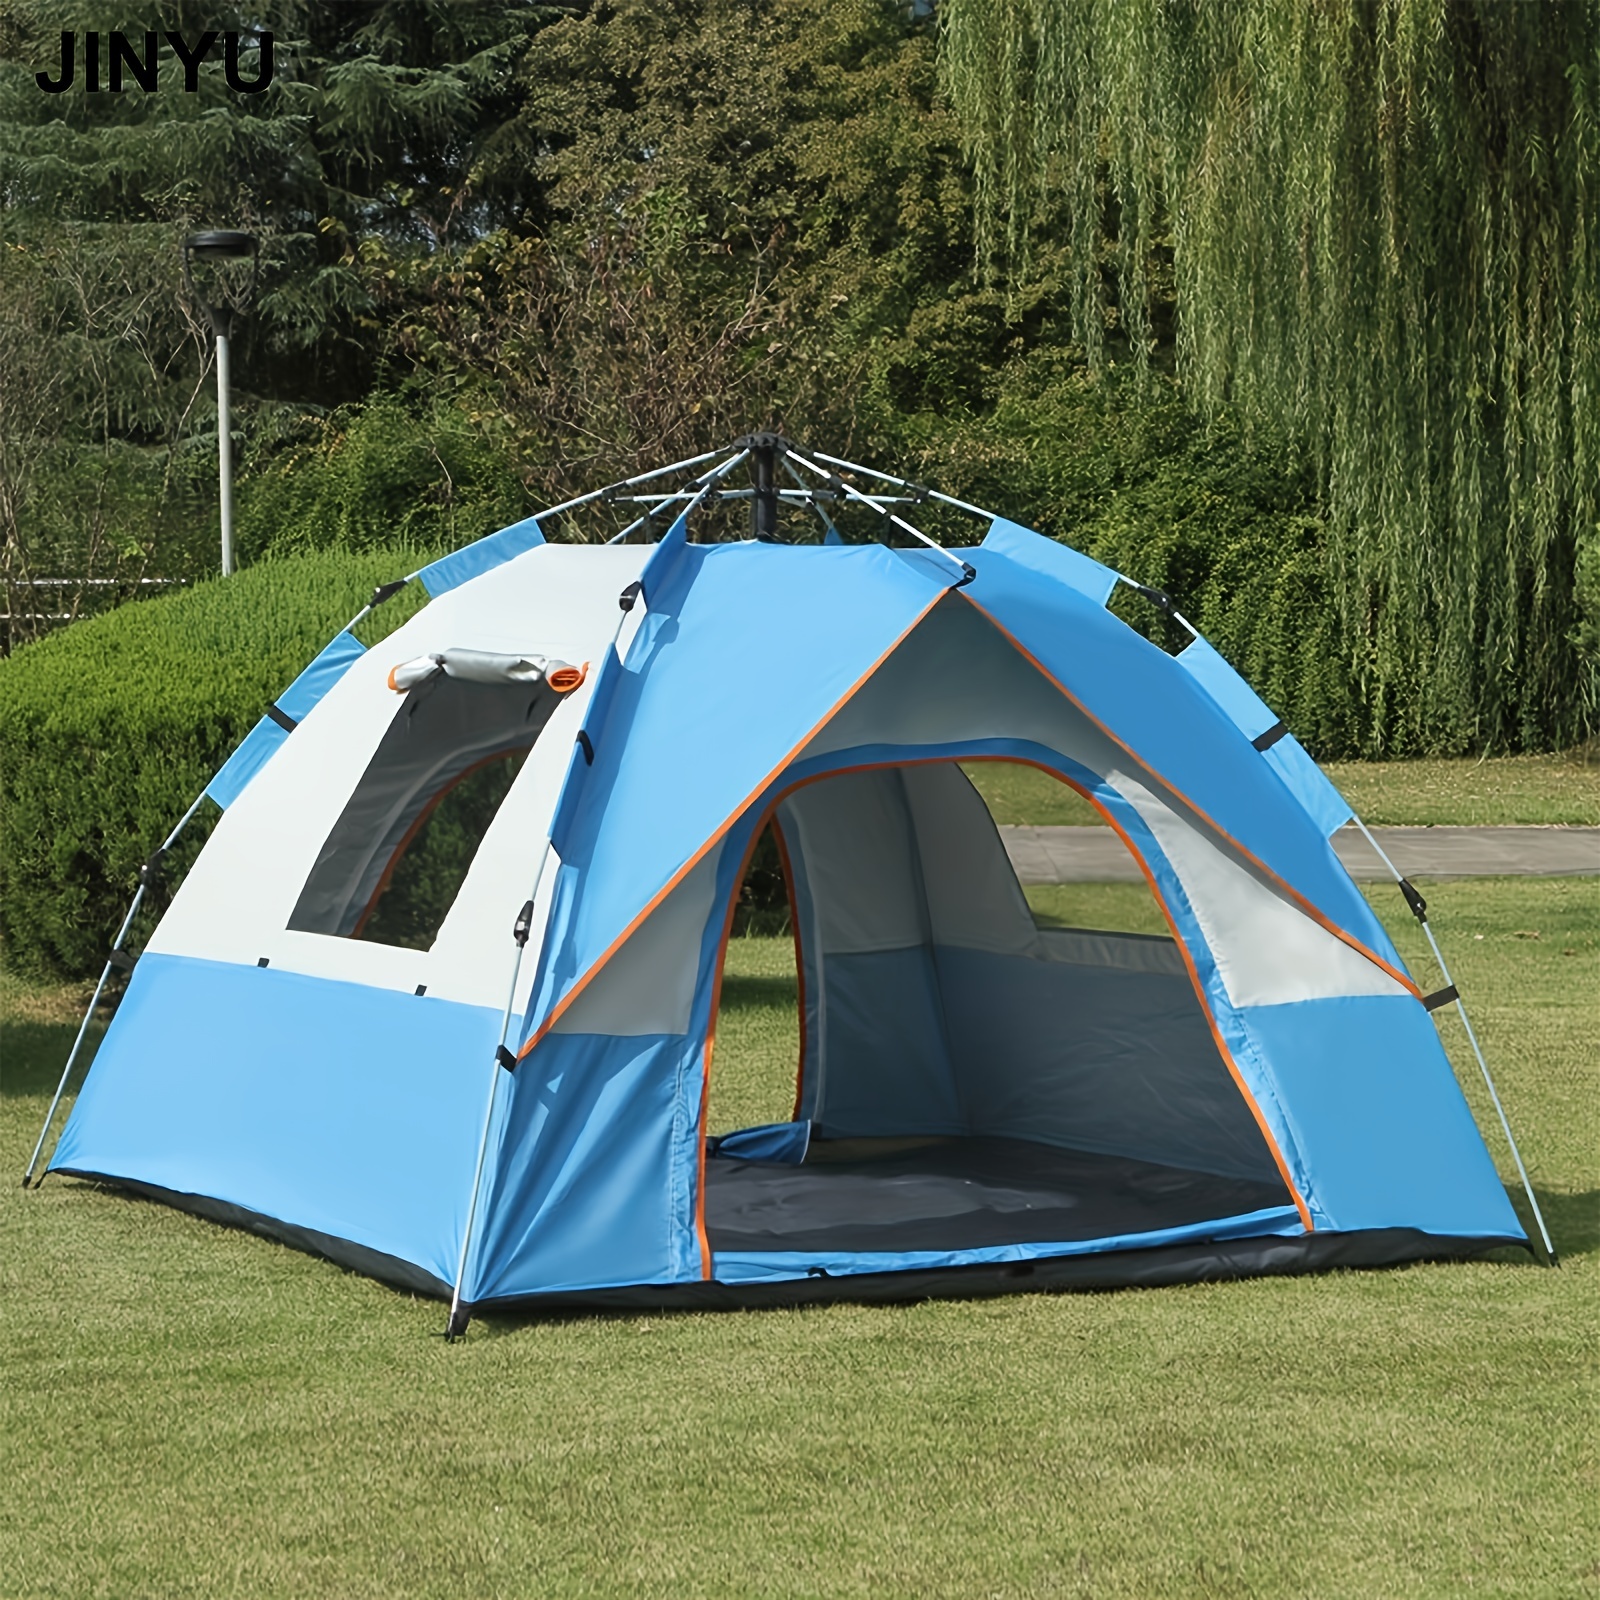 3-4 Season 2-Person Double Layer Backpacking Tent Aluminum Rod